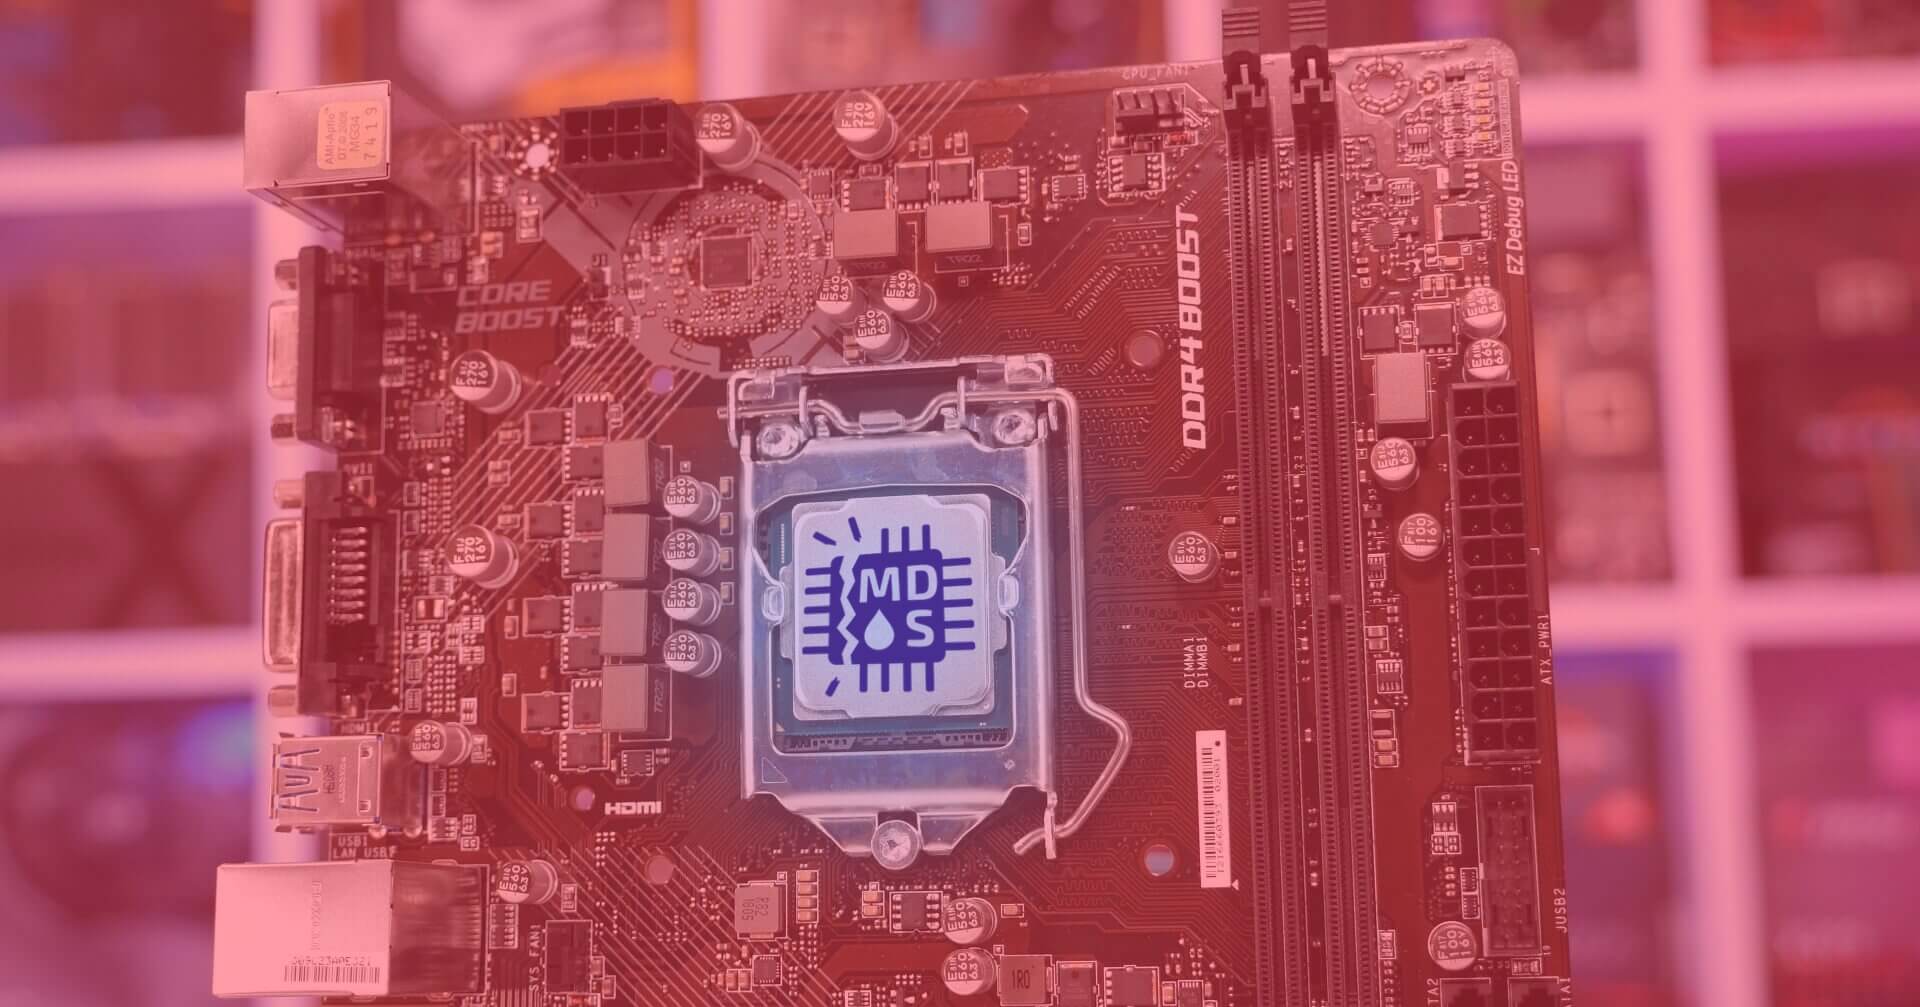 Another speculative execution exploit affects Intel Core CPUs